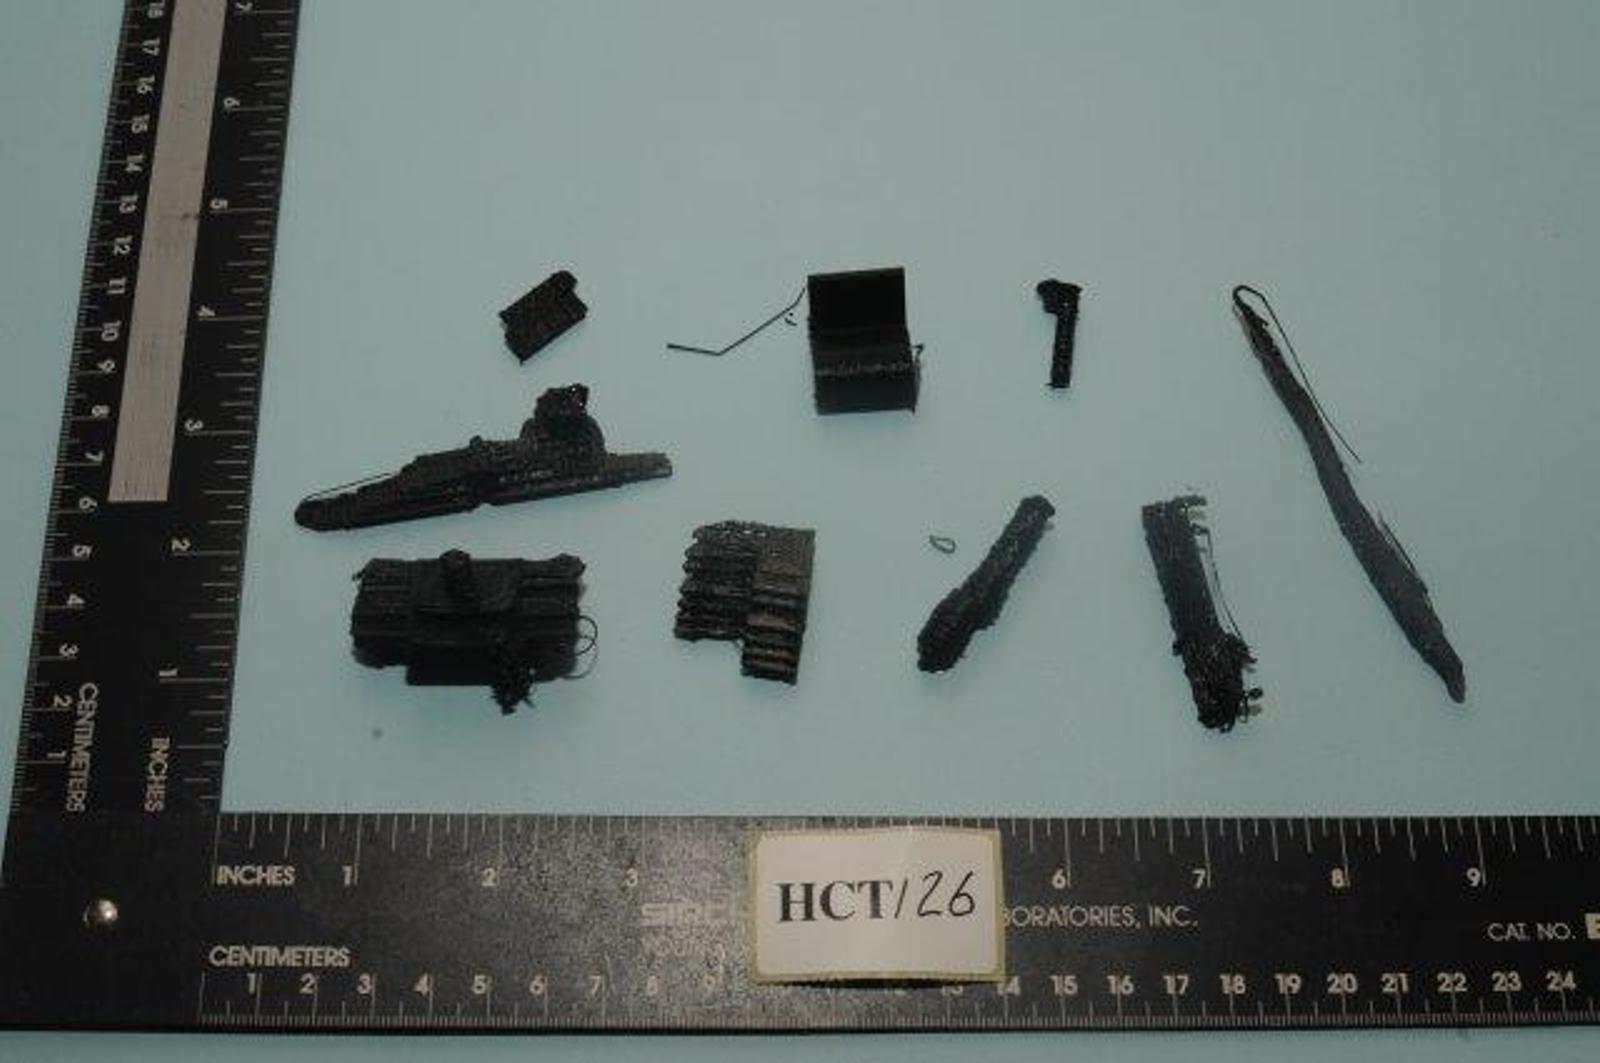 Plastic parts of a gun, which Harris attempted to 3D-print.